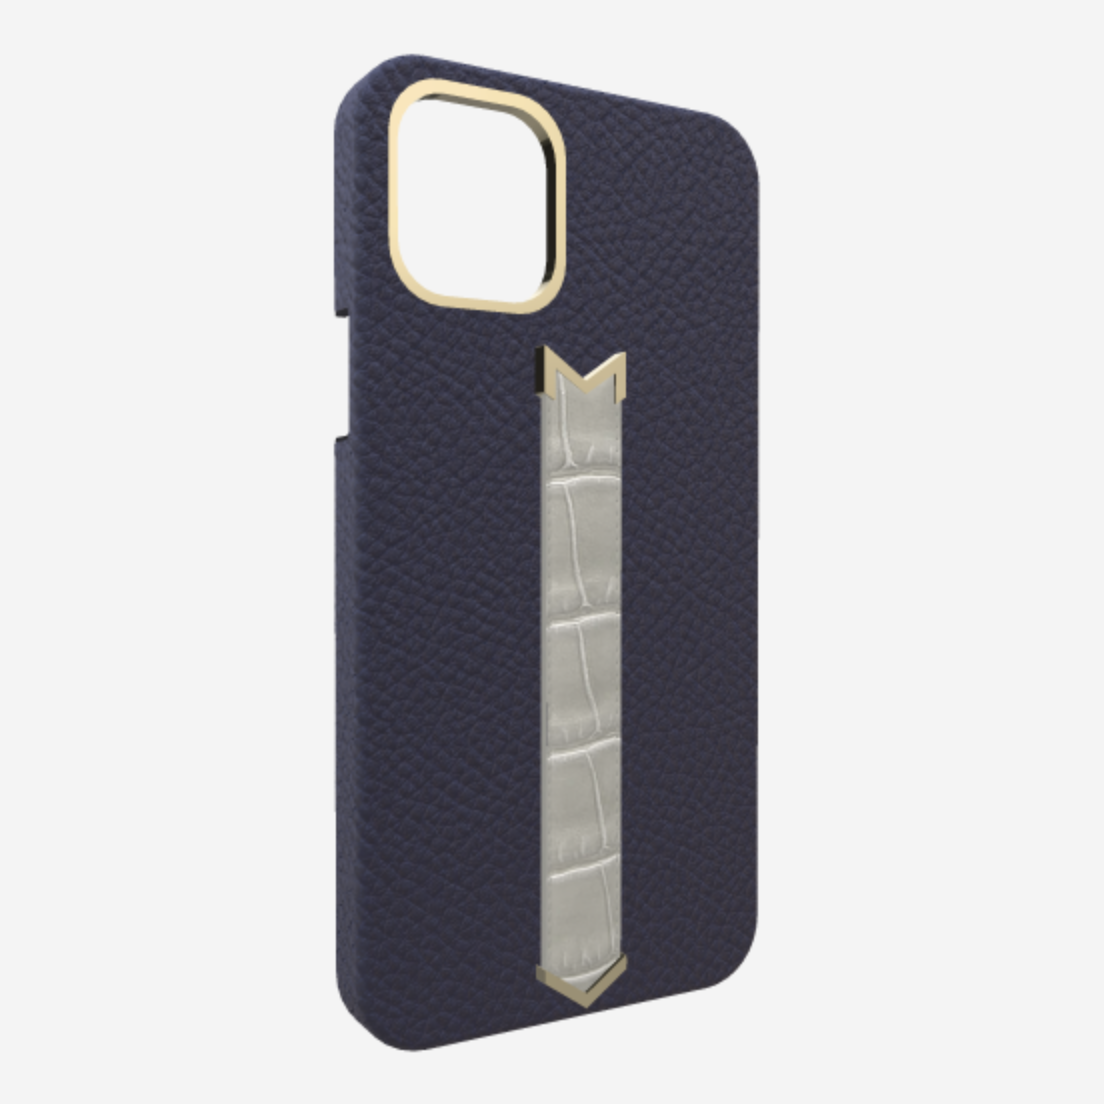 Gold Finger Strap Case for iPhone 13 Pro in Genuine Calfskin and Alligator Navy Blue Pearl Grey 